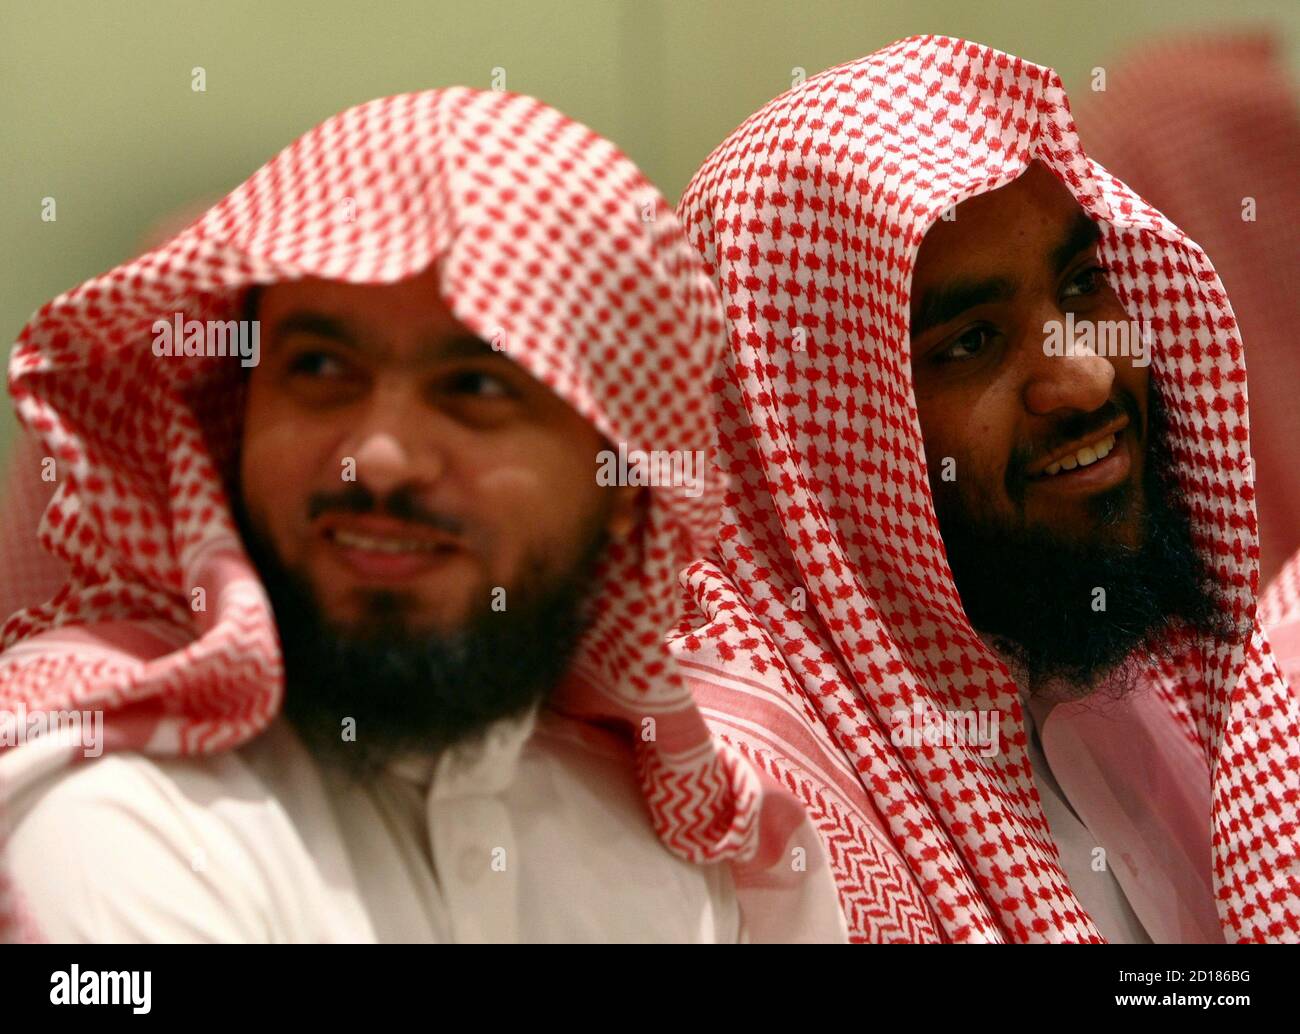 Members of the Committee for the Promotion of Virtue and Prevention of Vice, or religious police, attend a training course in Riyadh  April 29, 2009 . REUTERS/Fahad Shadeed (SAUDI ARABIA MILITARY RELIGION) Banque D'Images